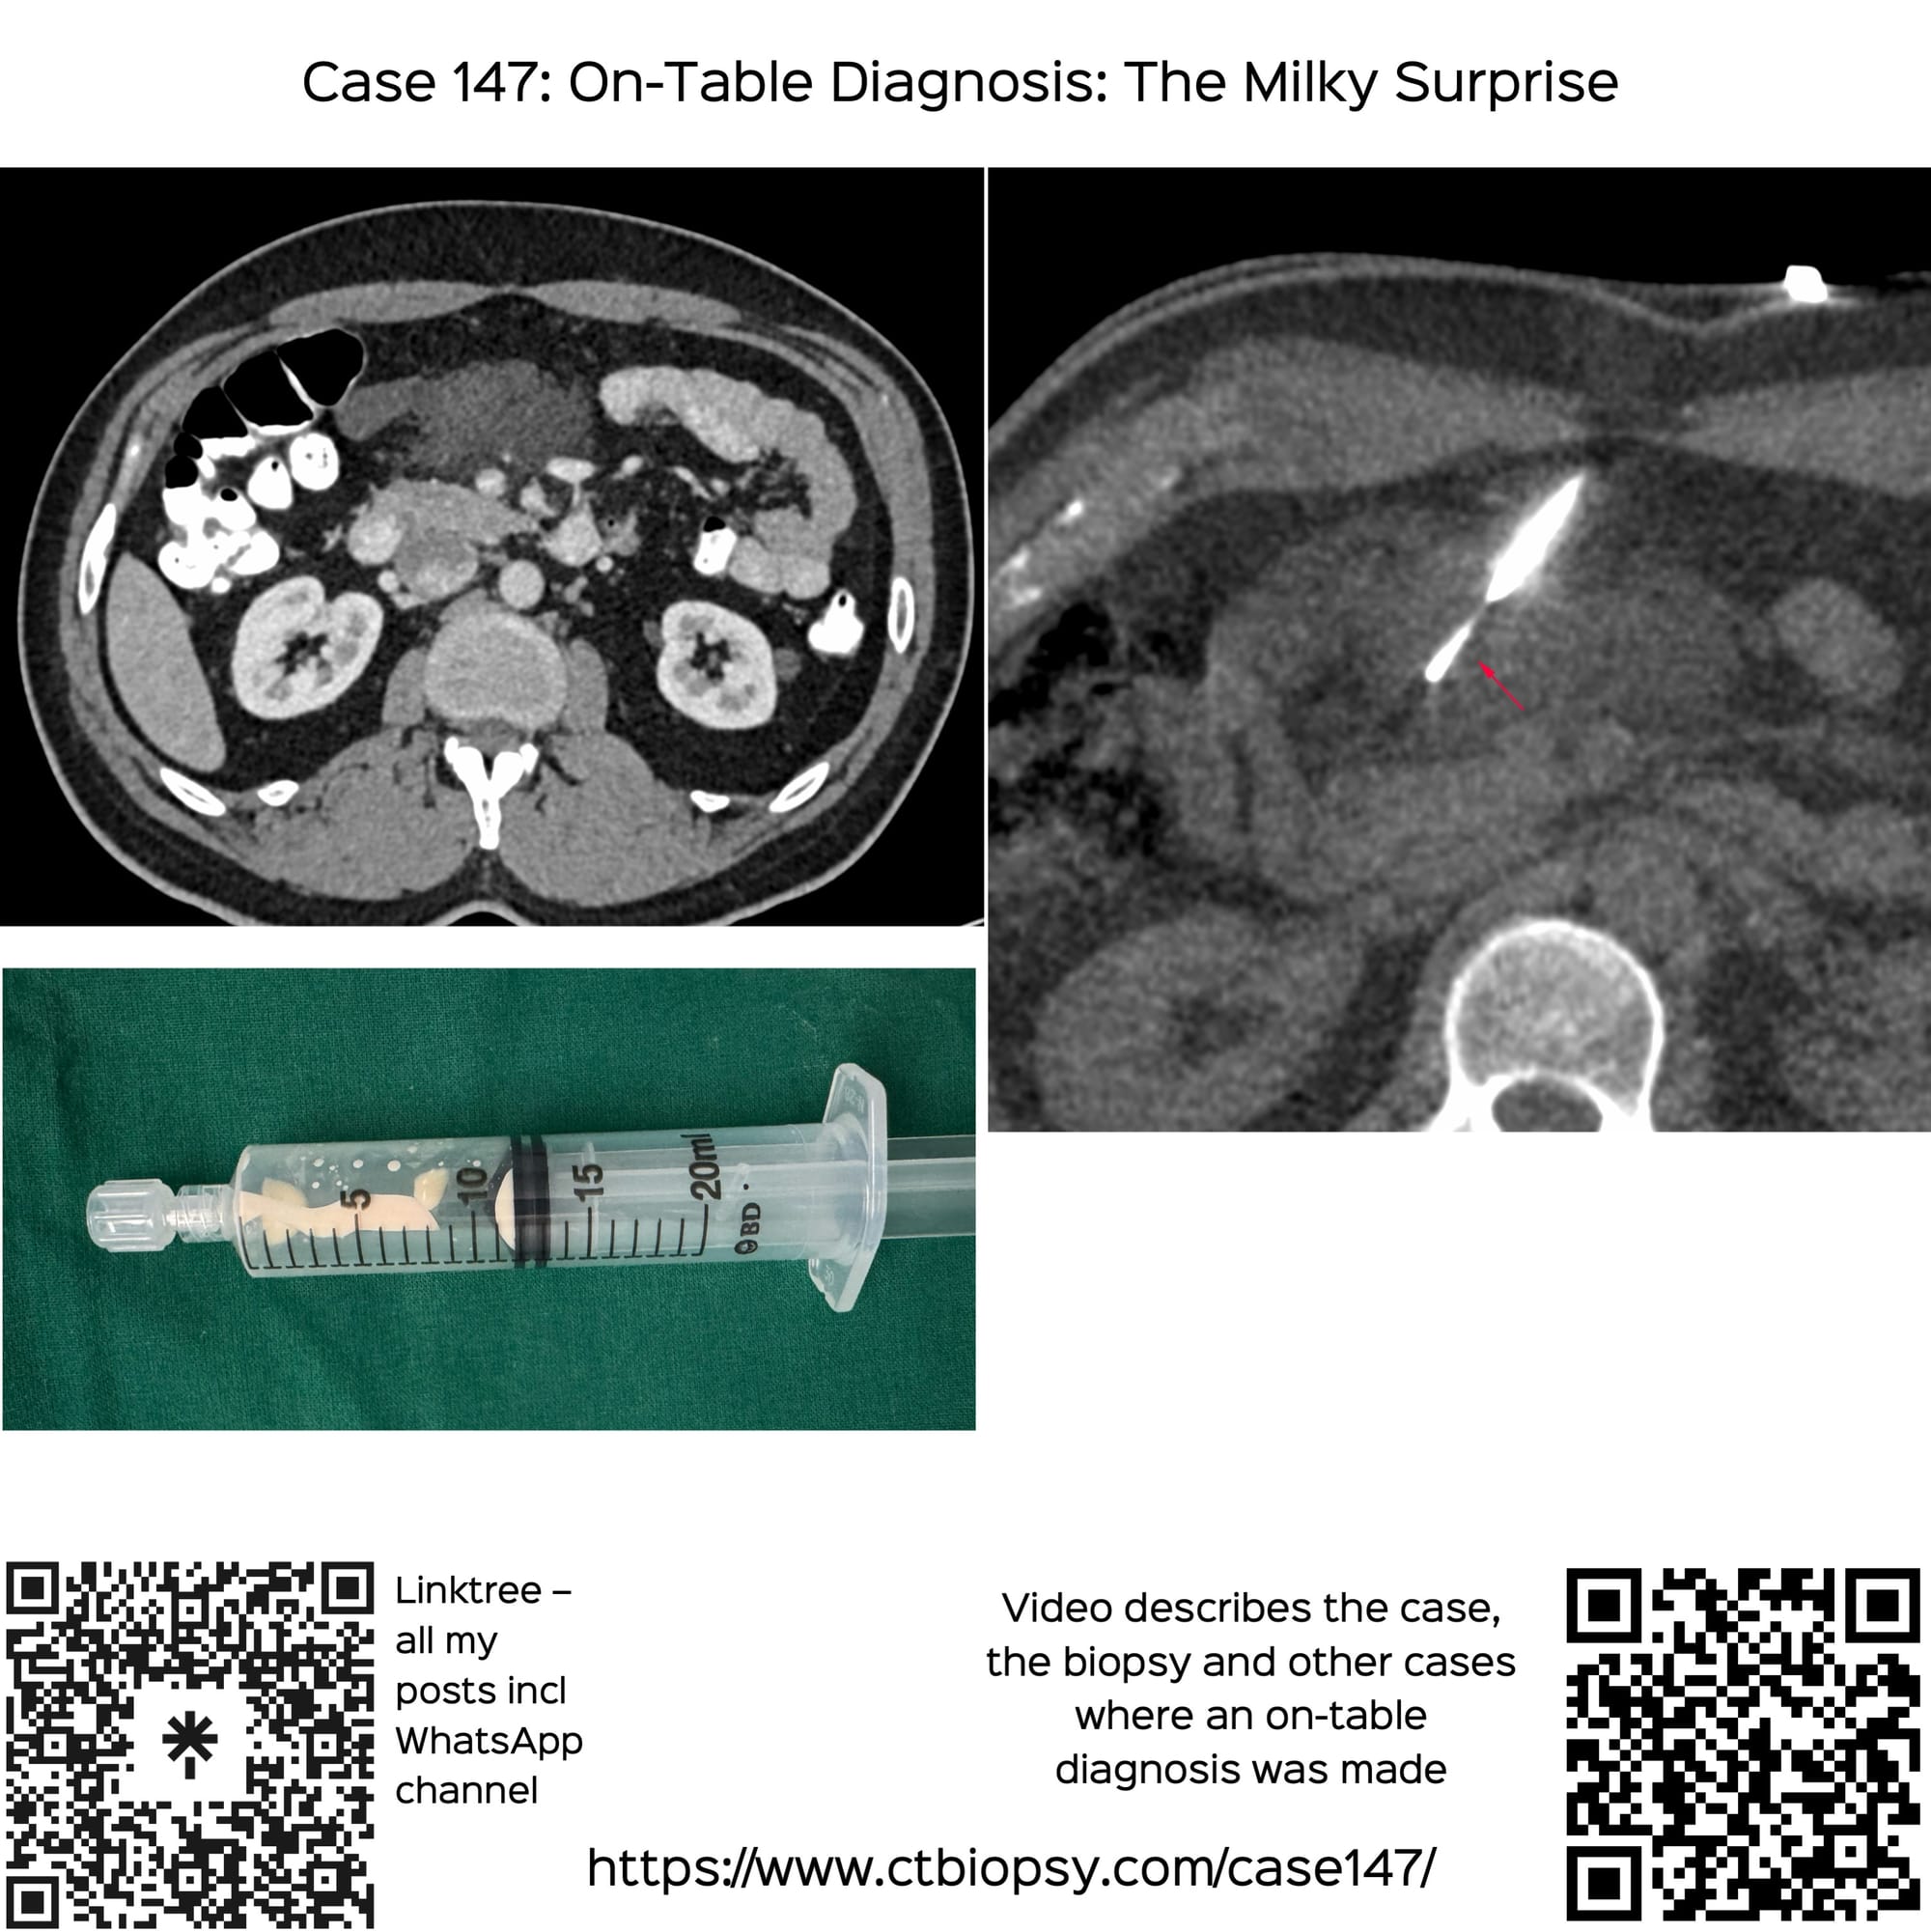 Case 147: On-Table Diagnosis - The Milky Surprise